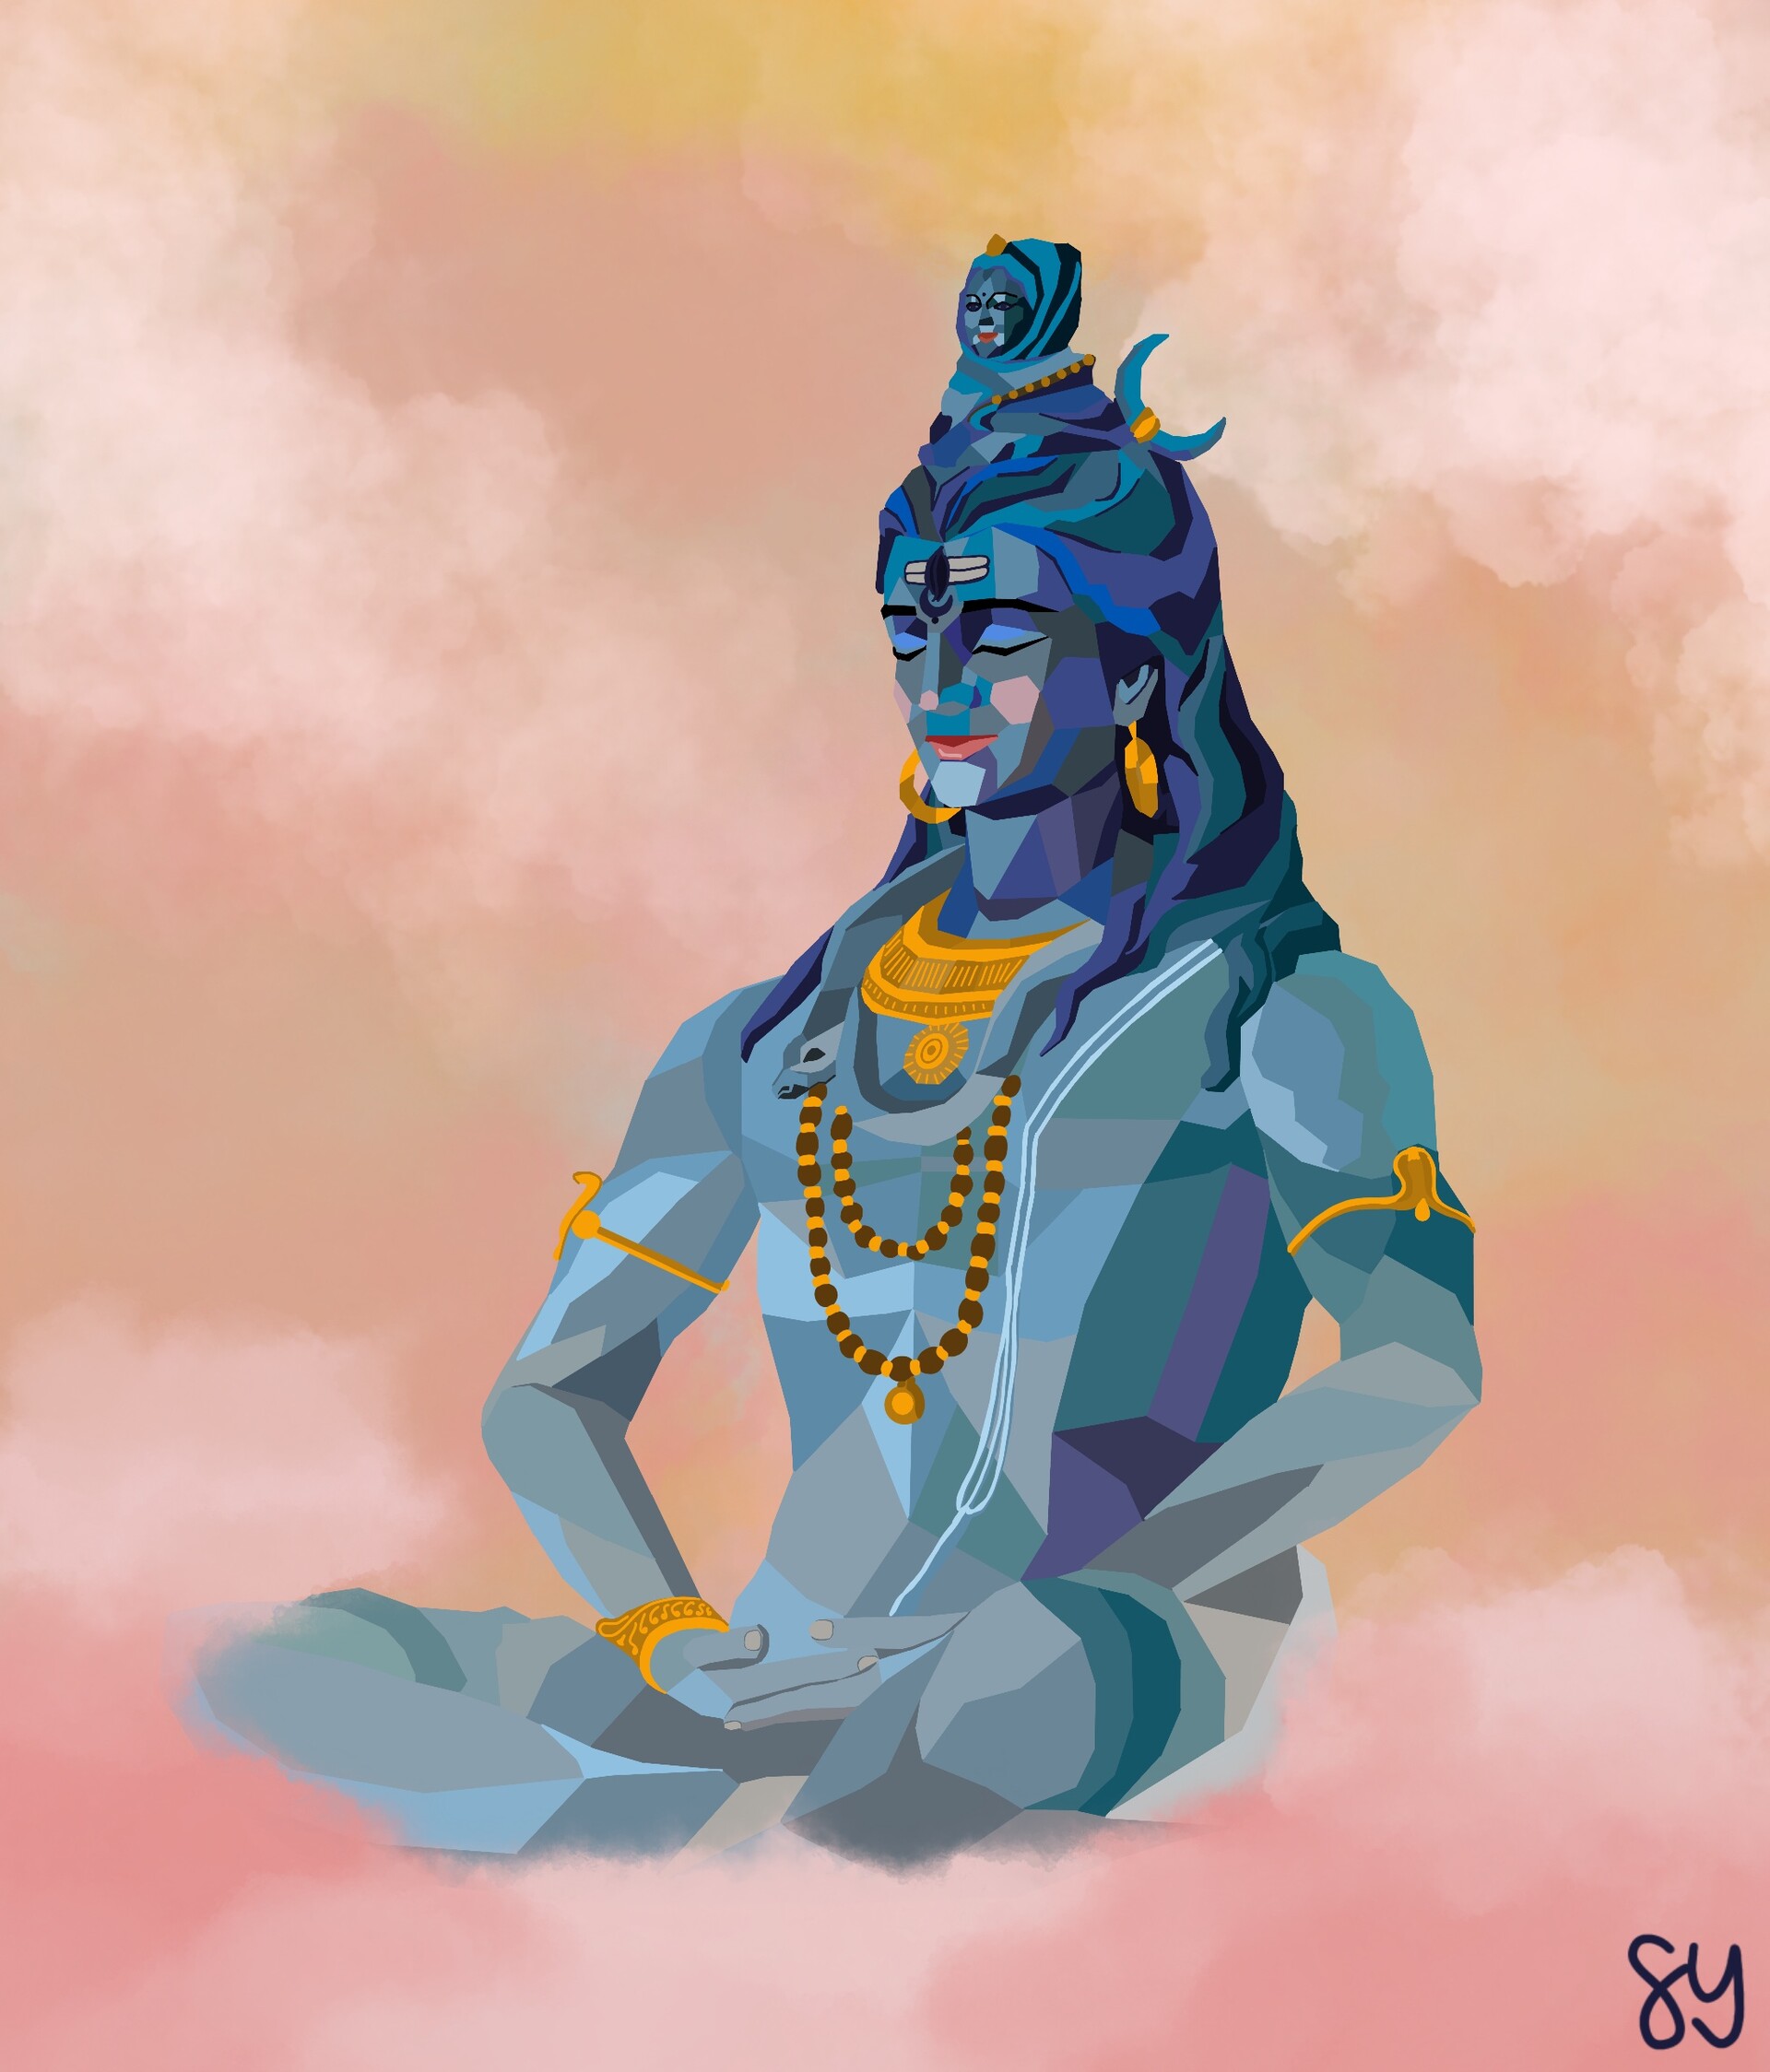 Lord Shiva in a AnimeManga styled drawing mix by Tywary on DeviantArt